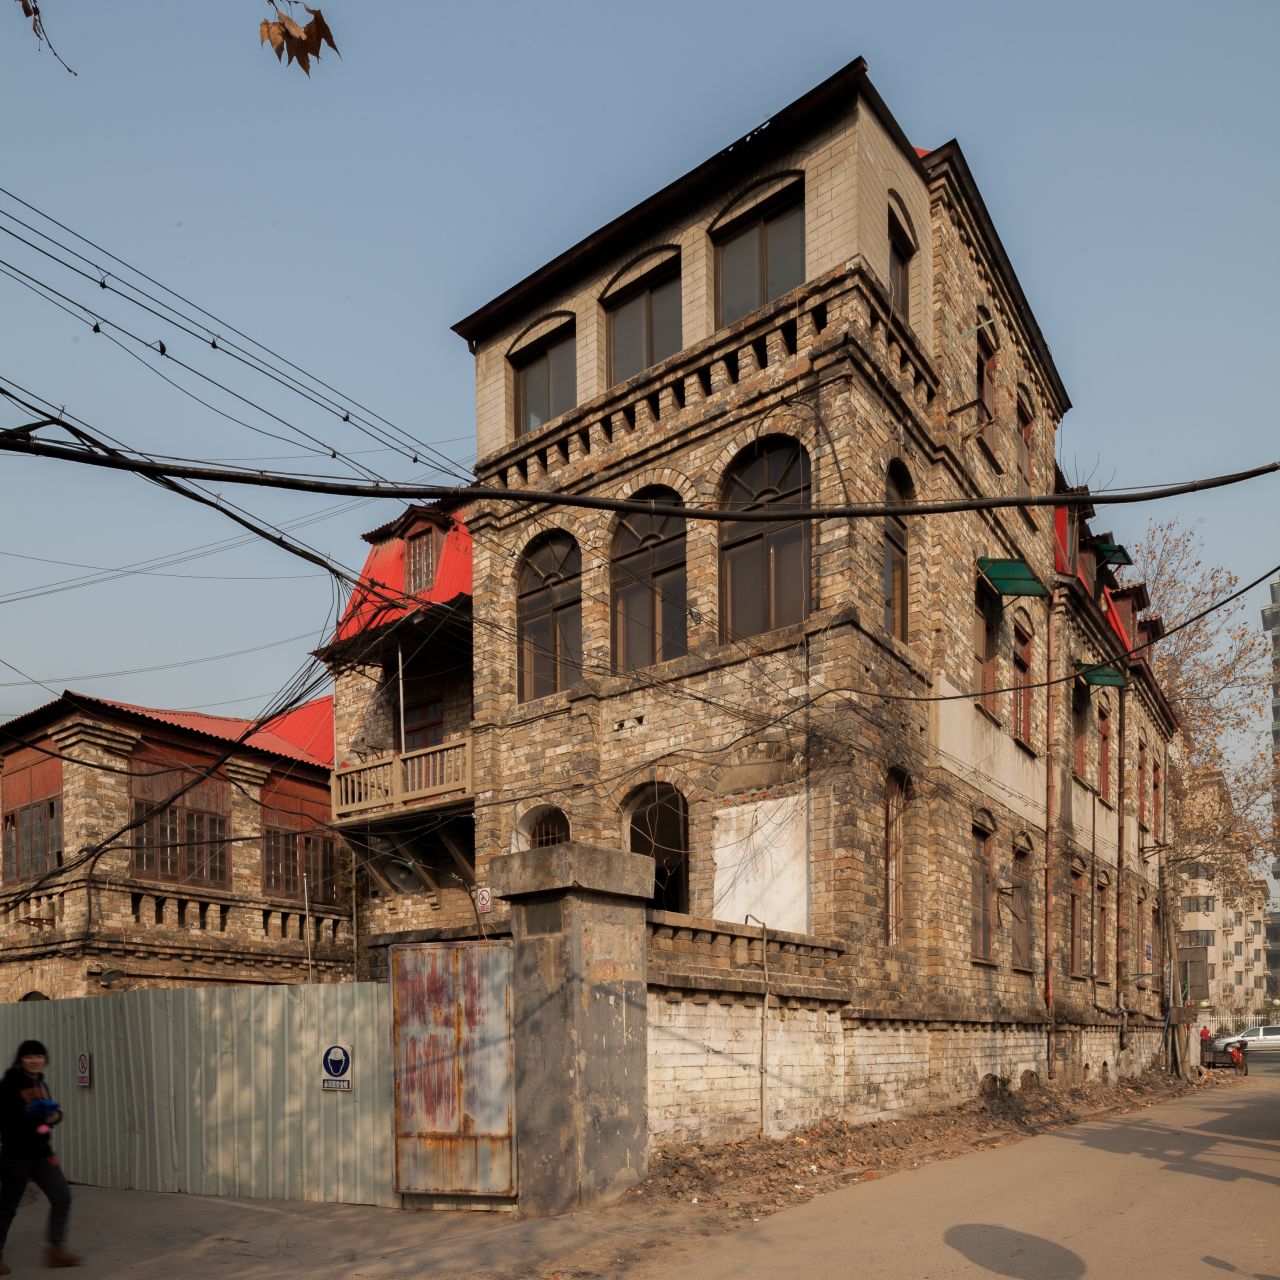 Although heritage projects can be hugely expensive, historic buildings have become increasingly desirable in China. Zhou says that the restoration of the Yangtze Villa Hotel allowed its owners to significantly increase the room rates.